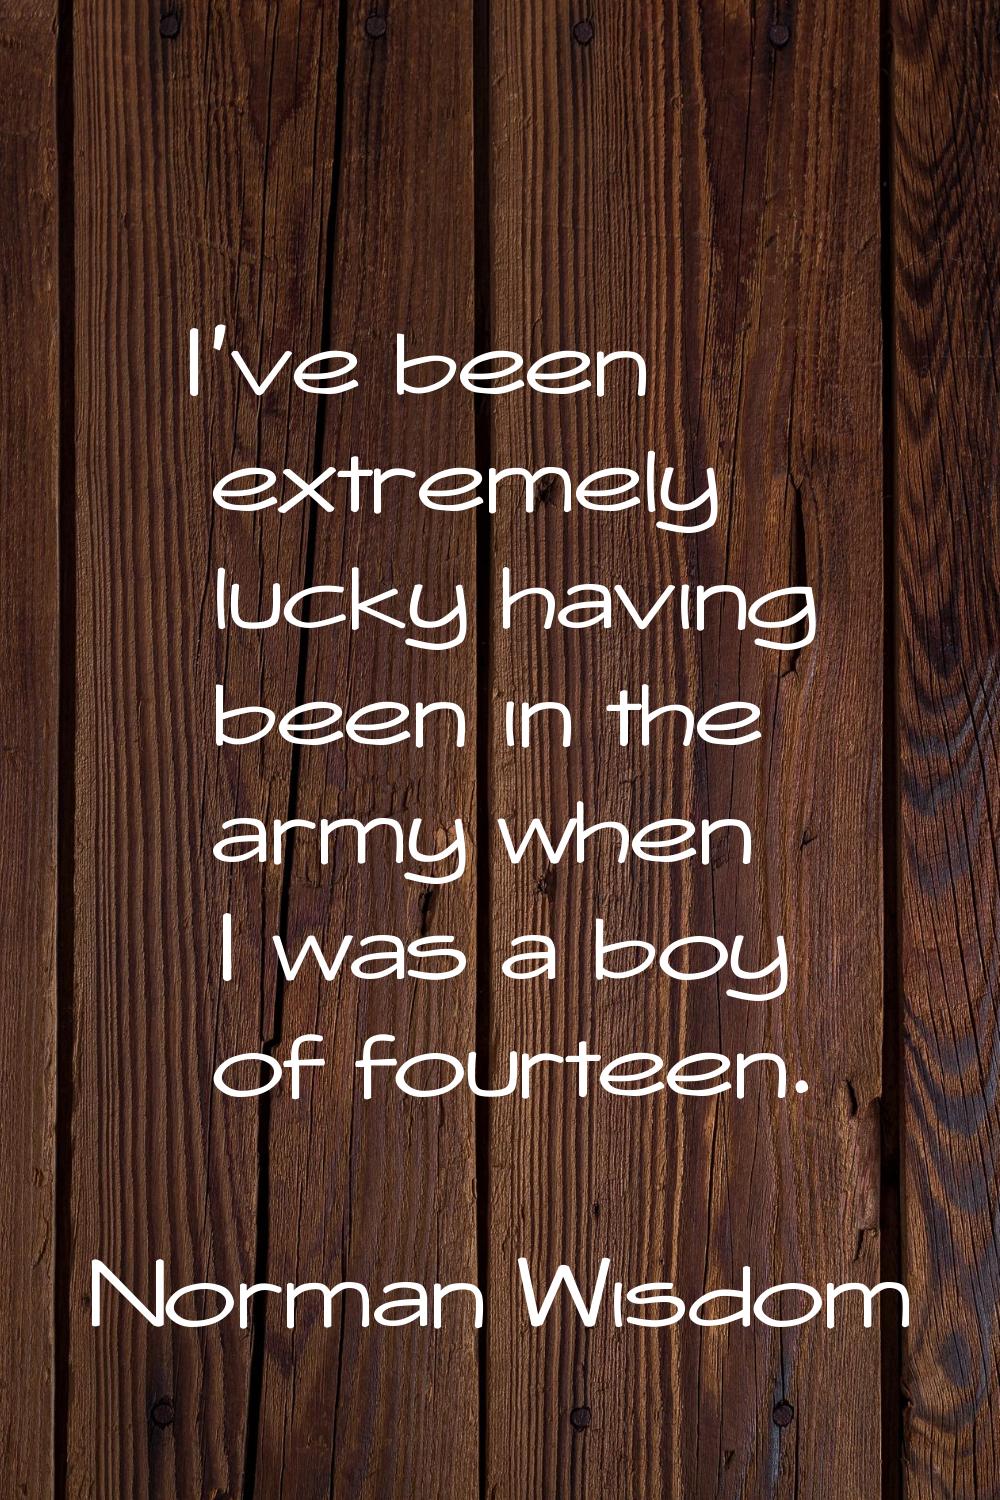 I've been extremely lucky having been in the army when I was a boy of fourteen.